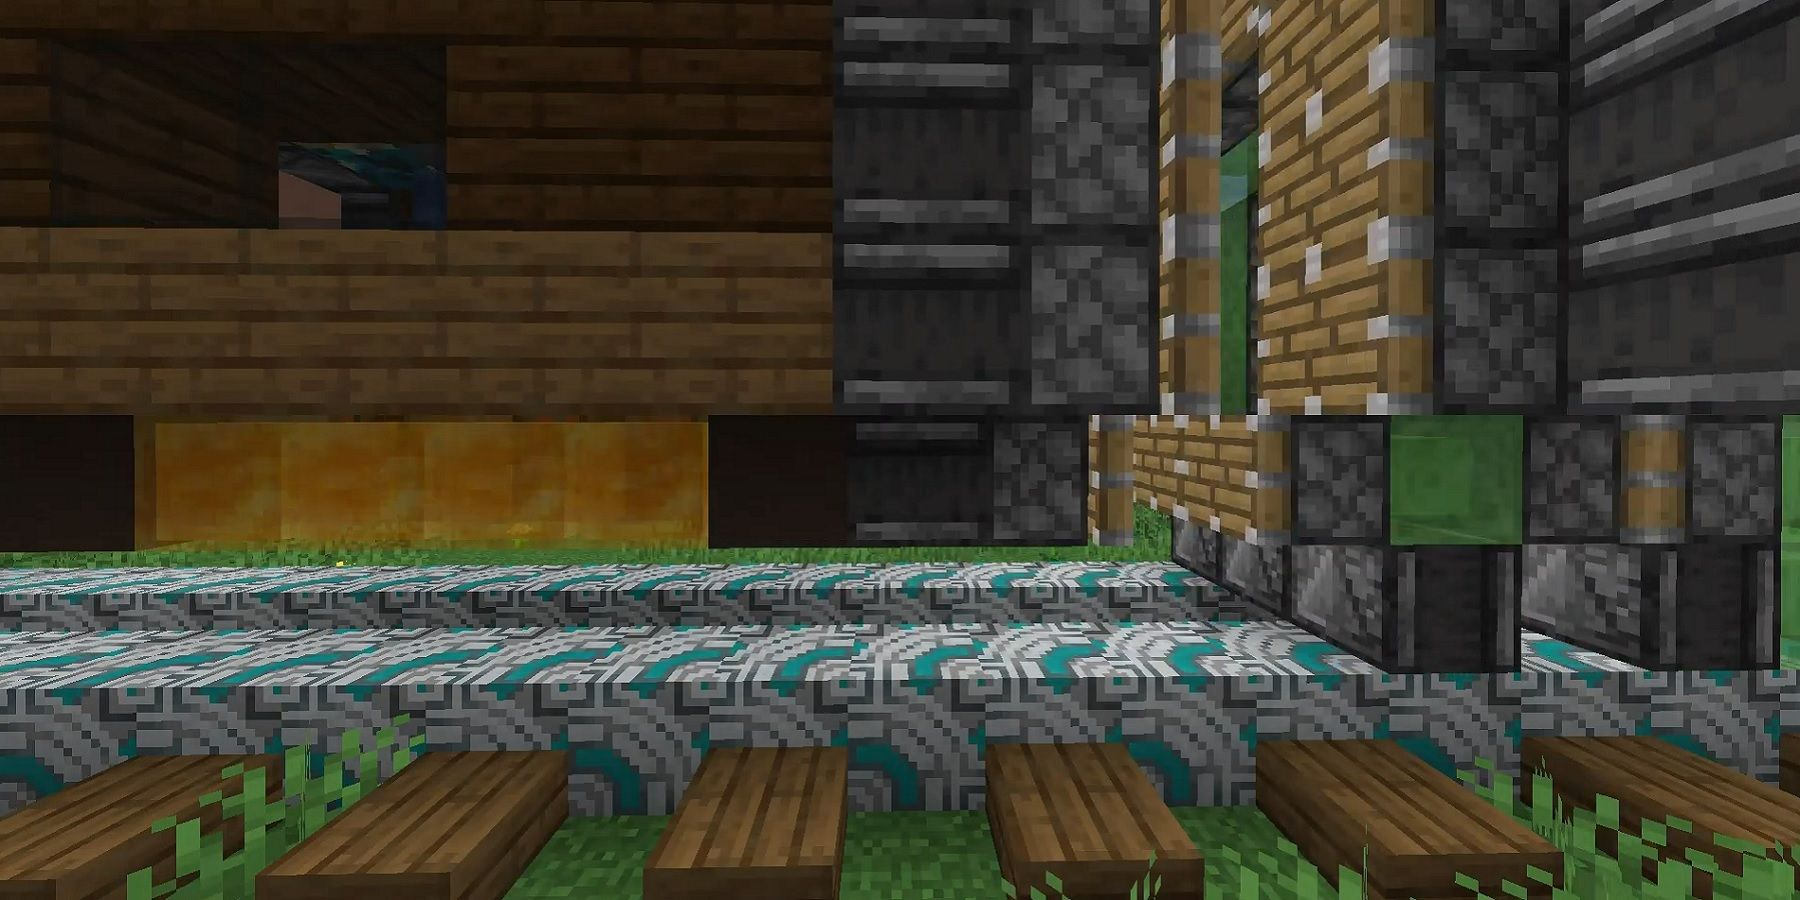 Screenshot from Minecraft showing the side of a train.